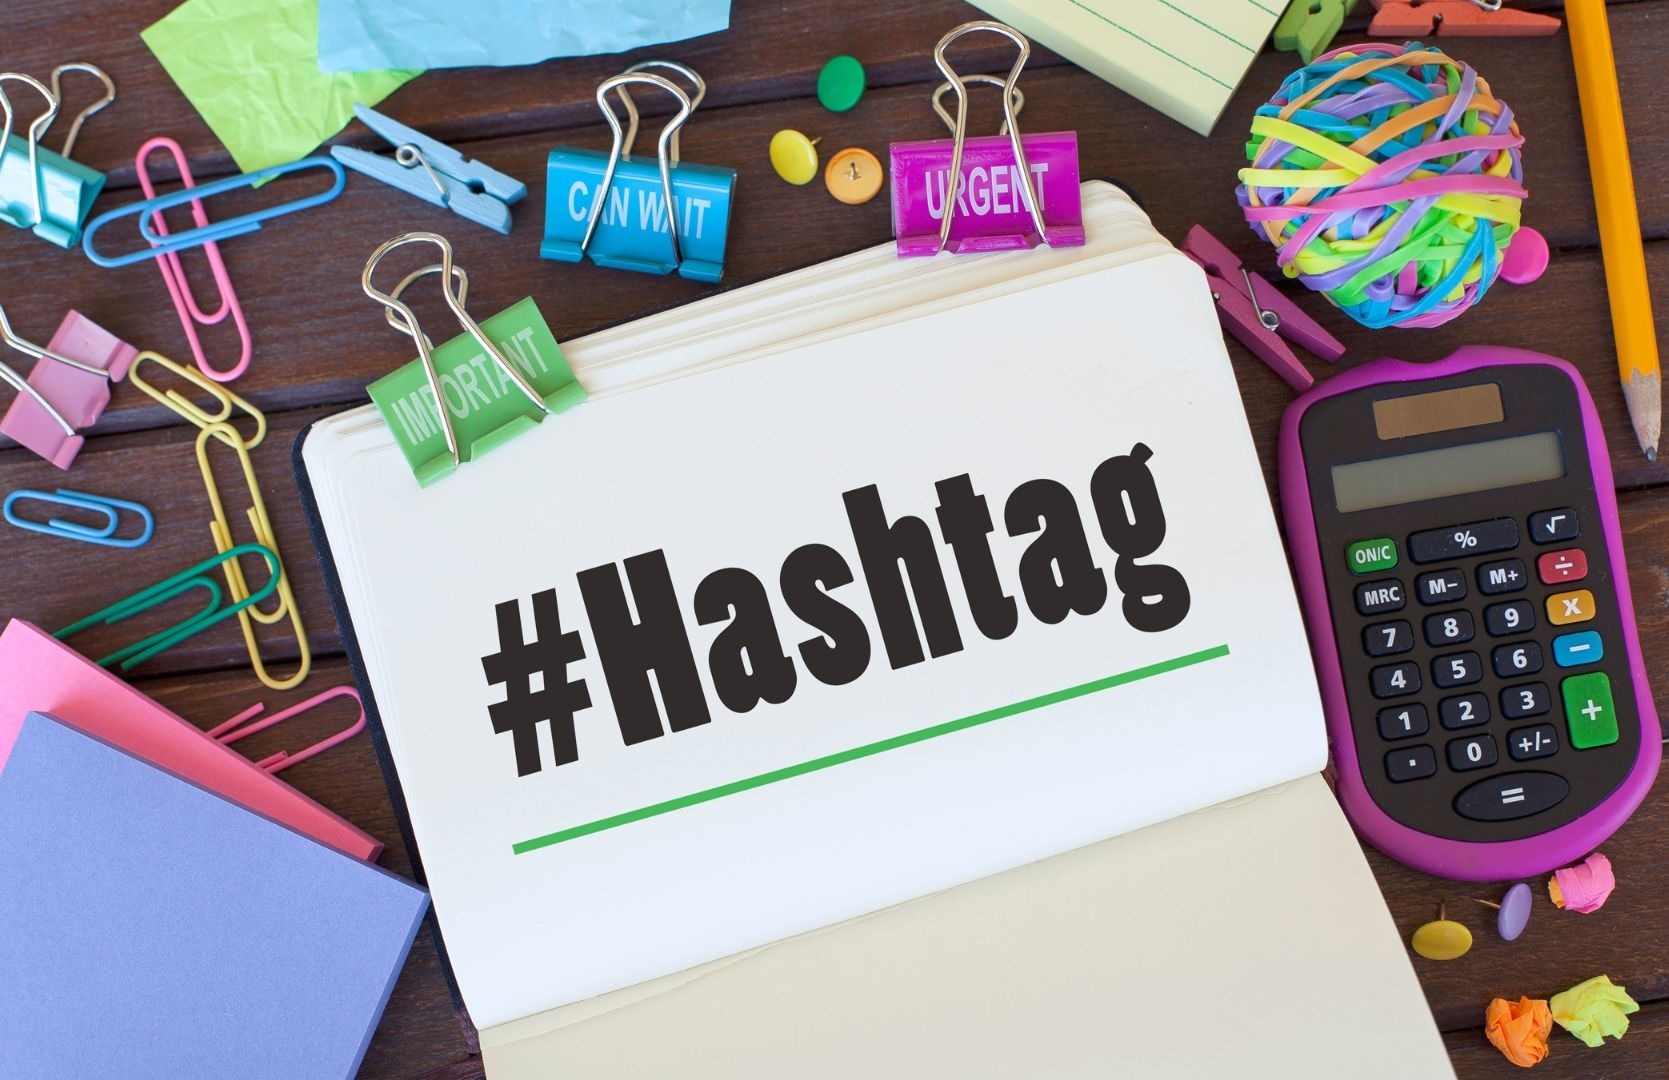 use hashtags to get more followers